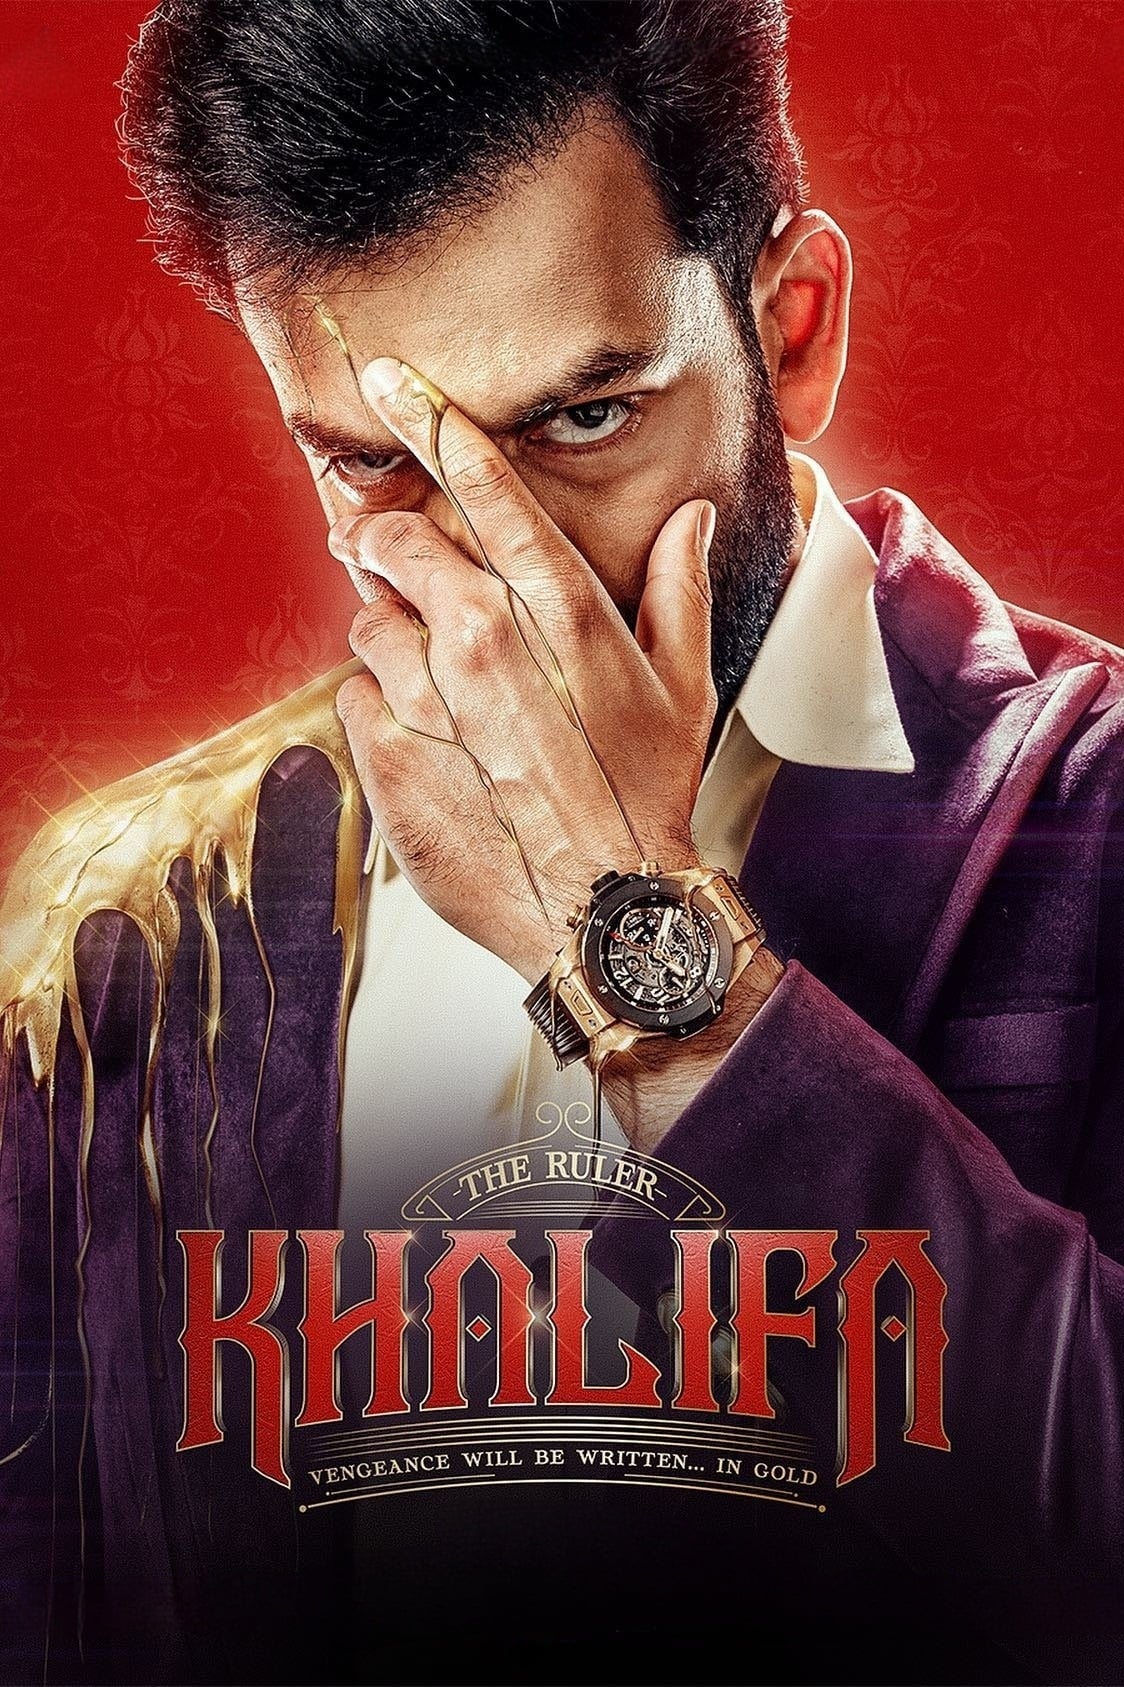 Poster for the movie "Khalifa"